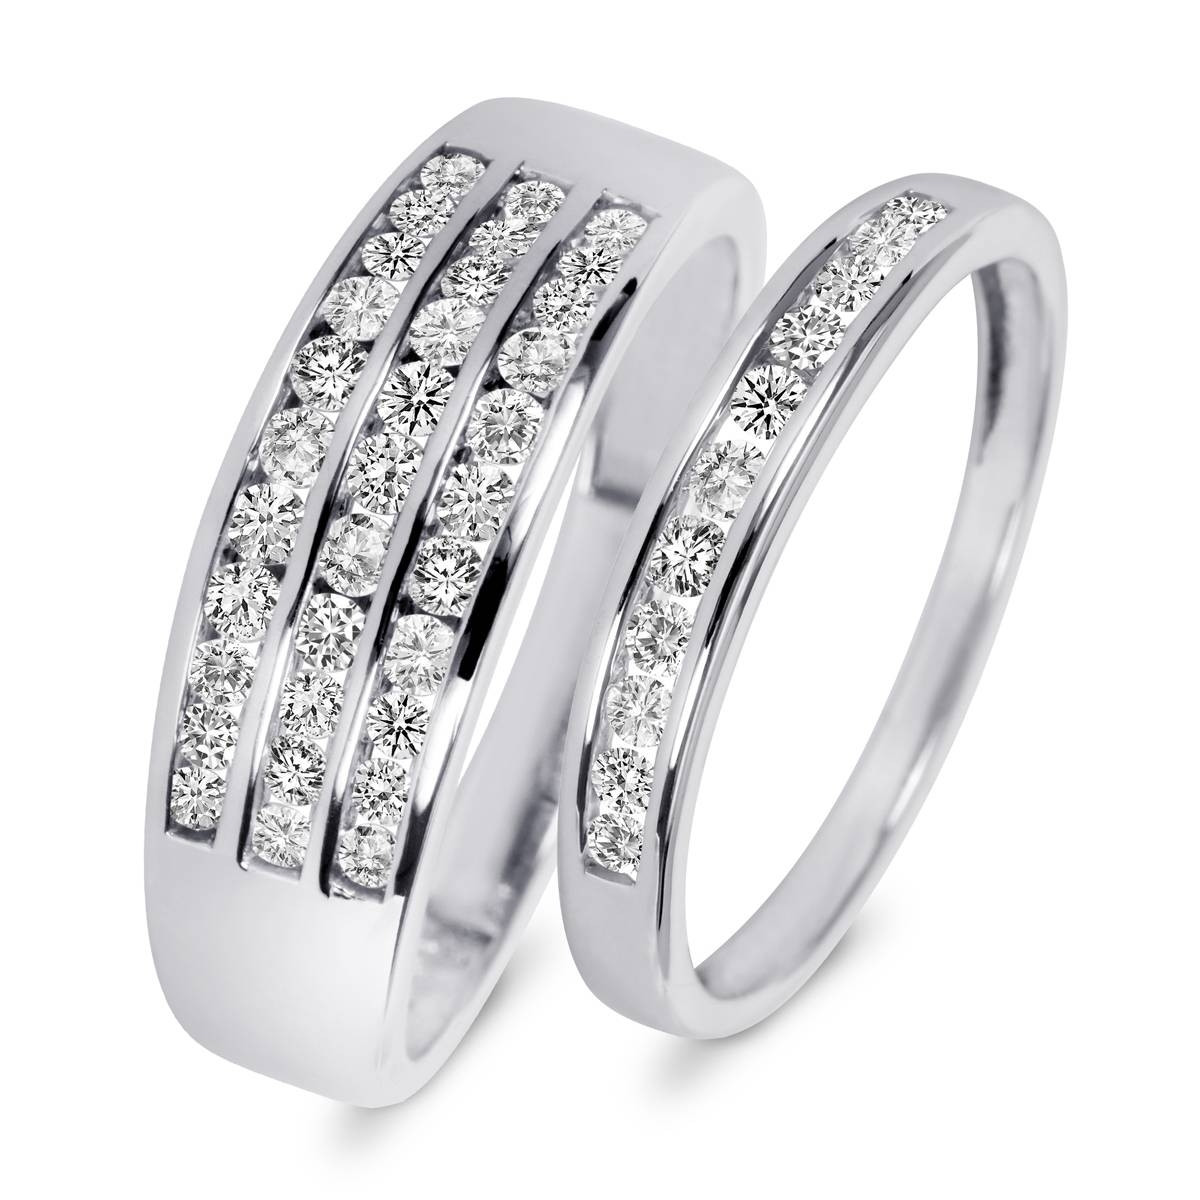 White Gold Wedding Ring Sets His And Hers
 15 Inspirations of Cheap Wedding Bands Sets His And Hers